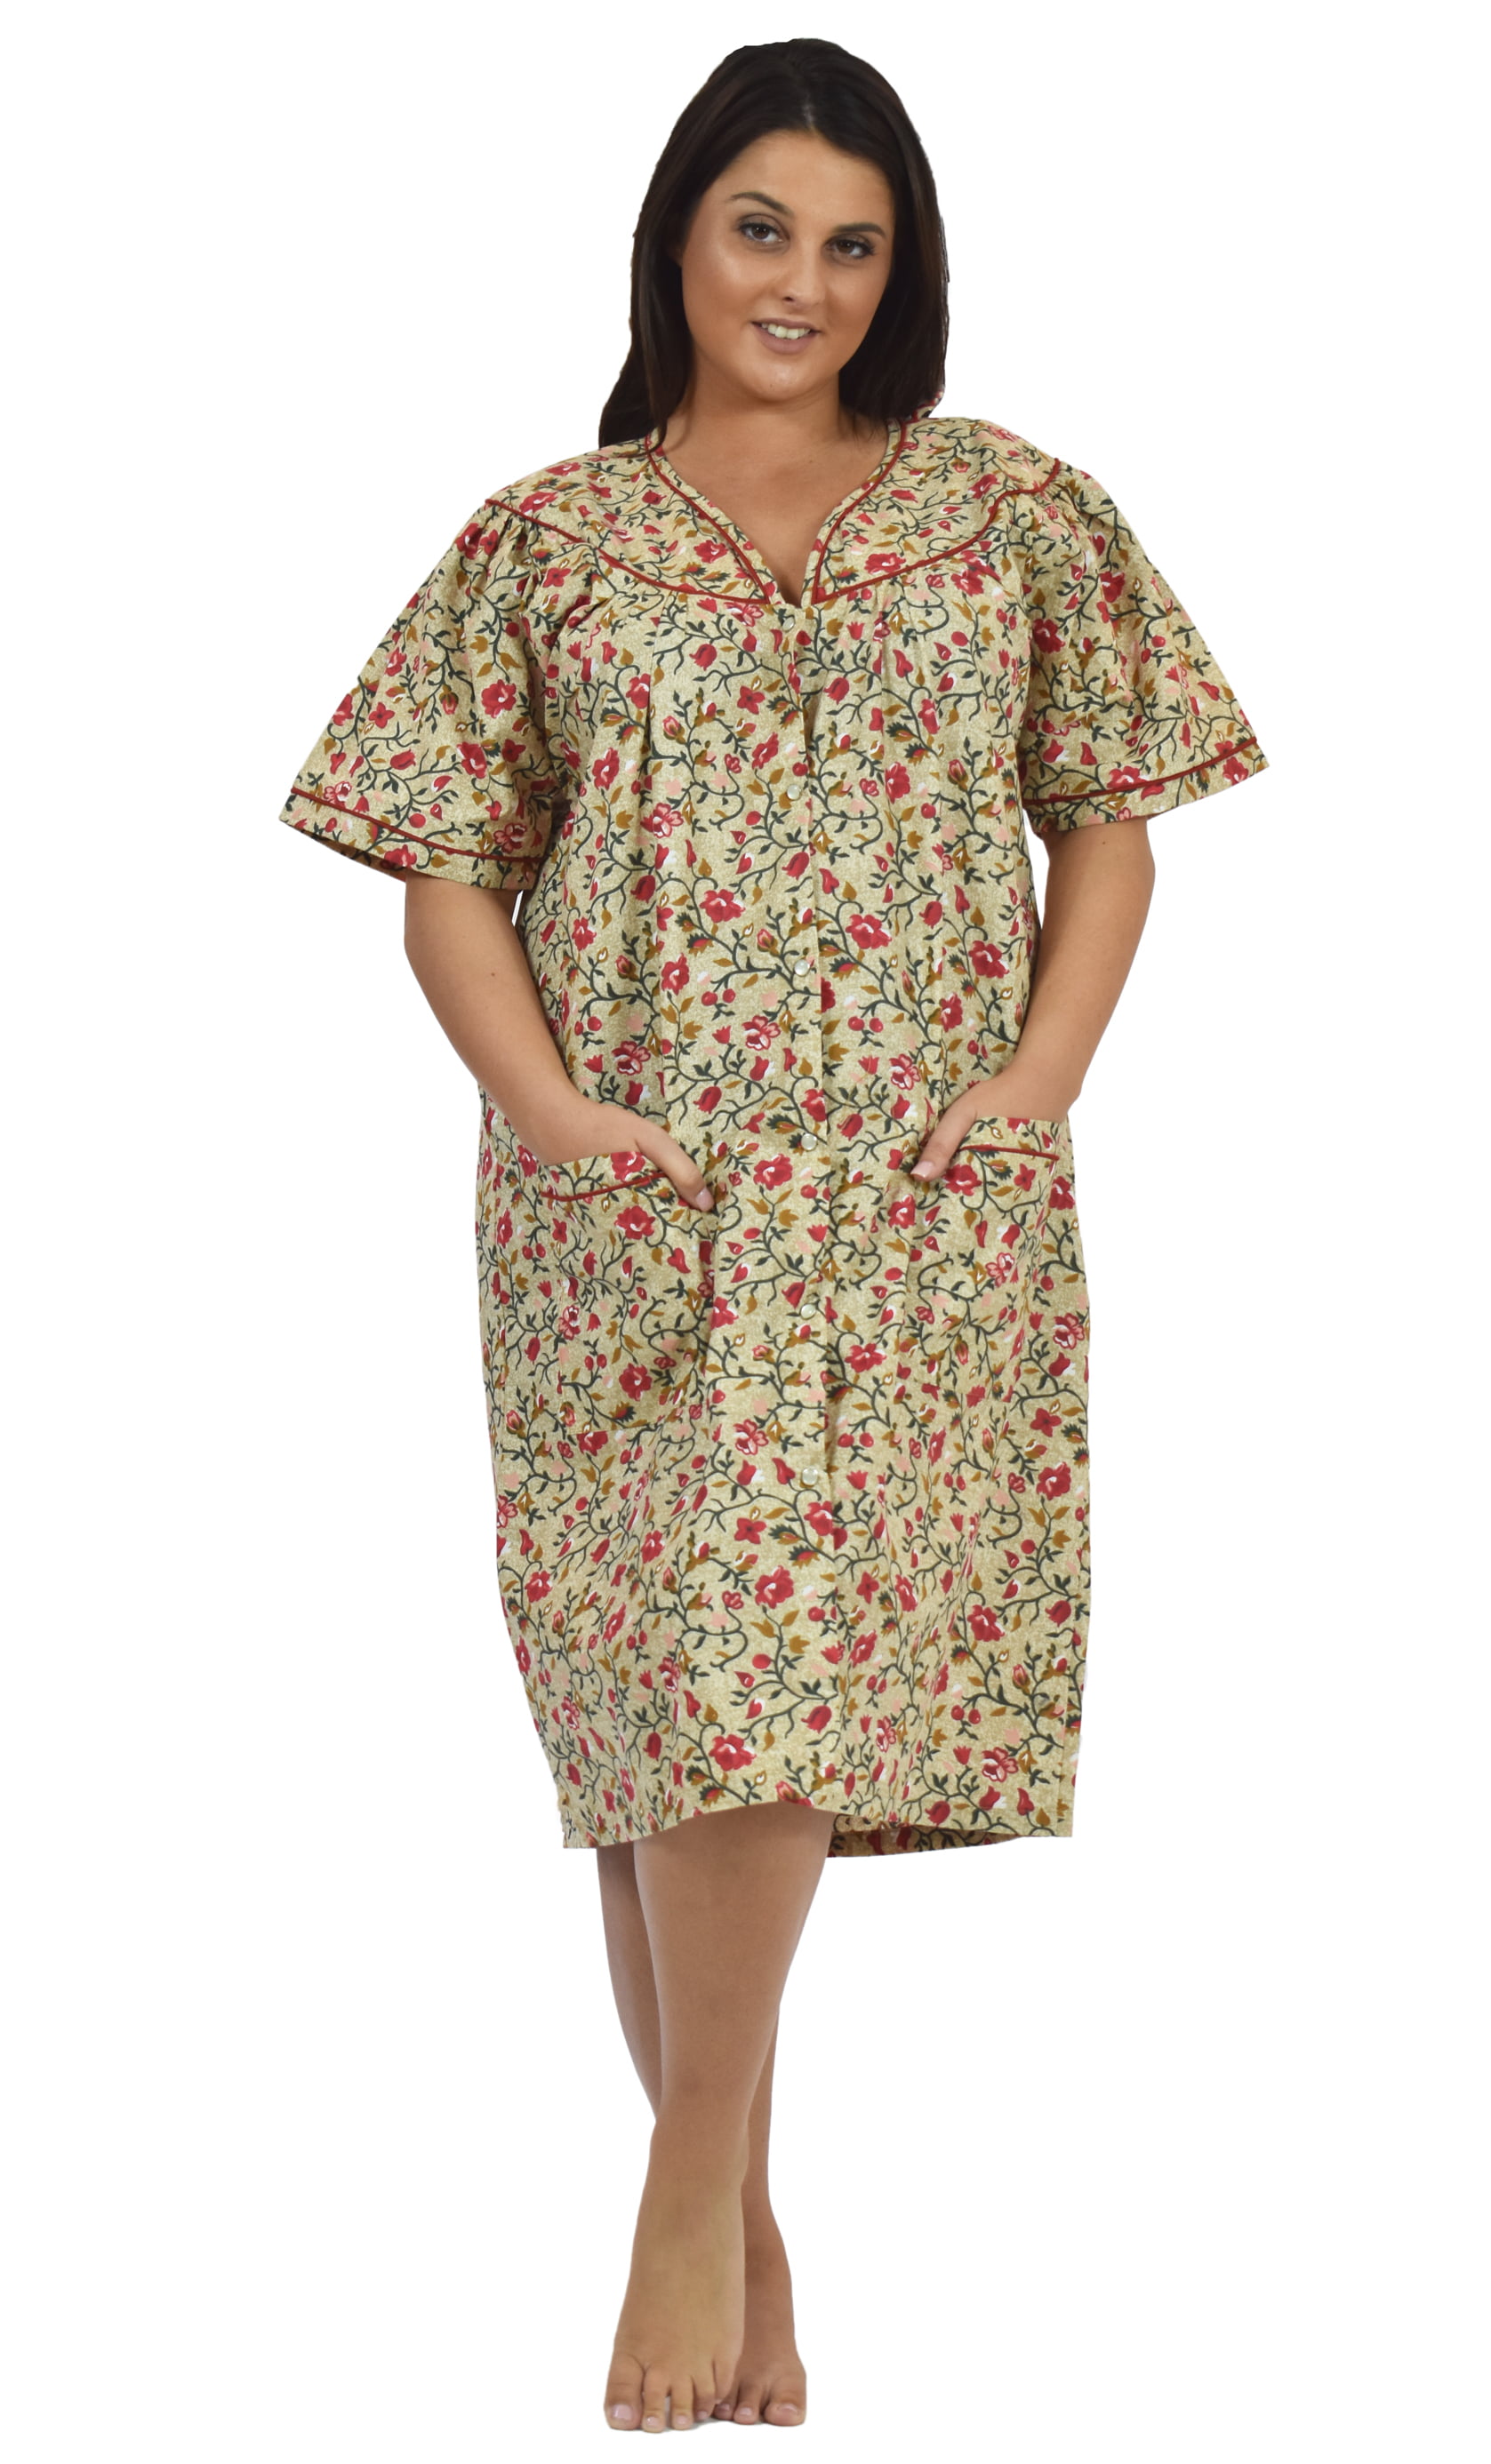 Buy > cotton house dress plus size > in stock